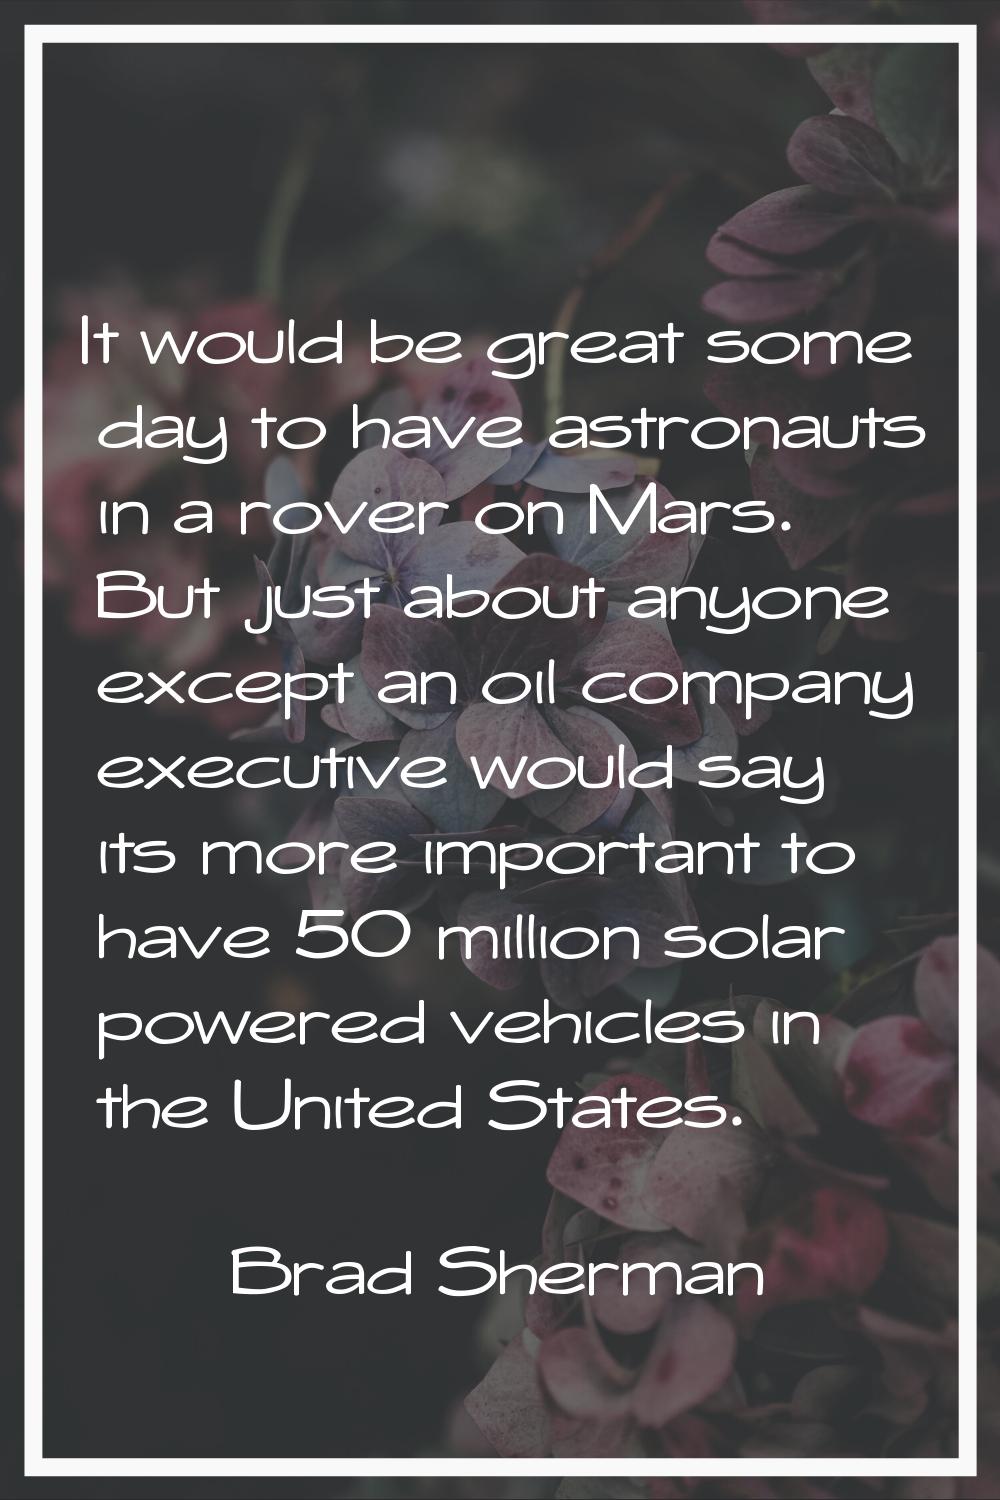 It would be great some day to have astronauts in a rover on Mars. But just about anyone except an o